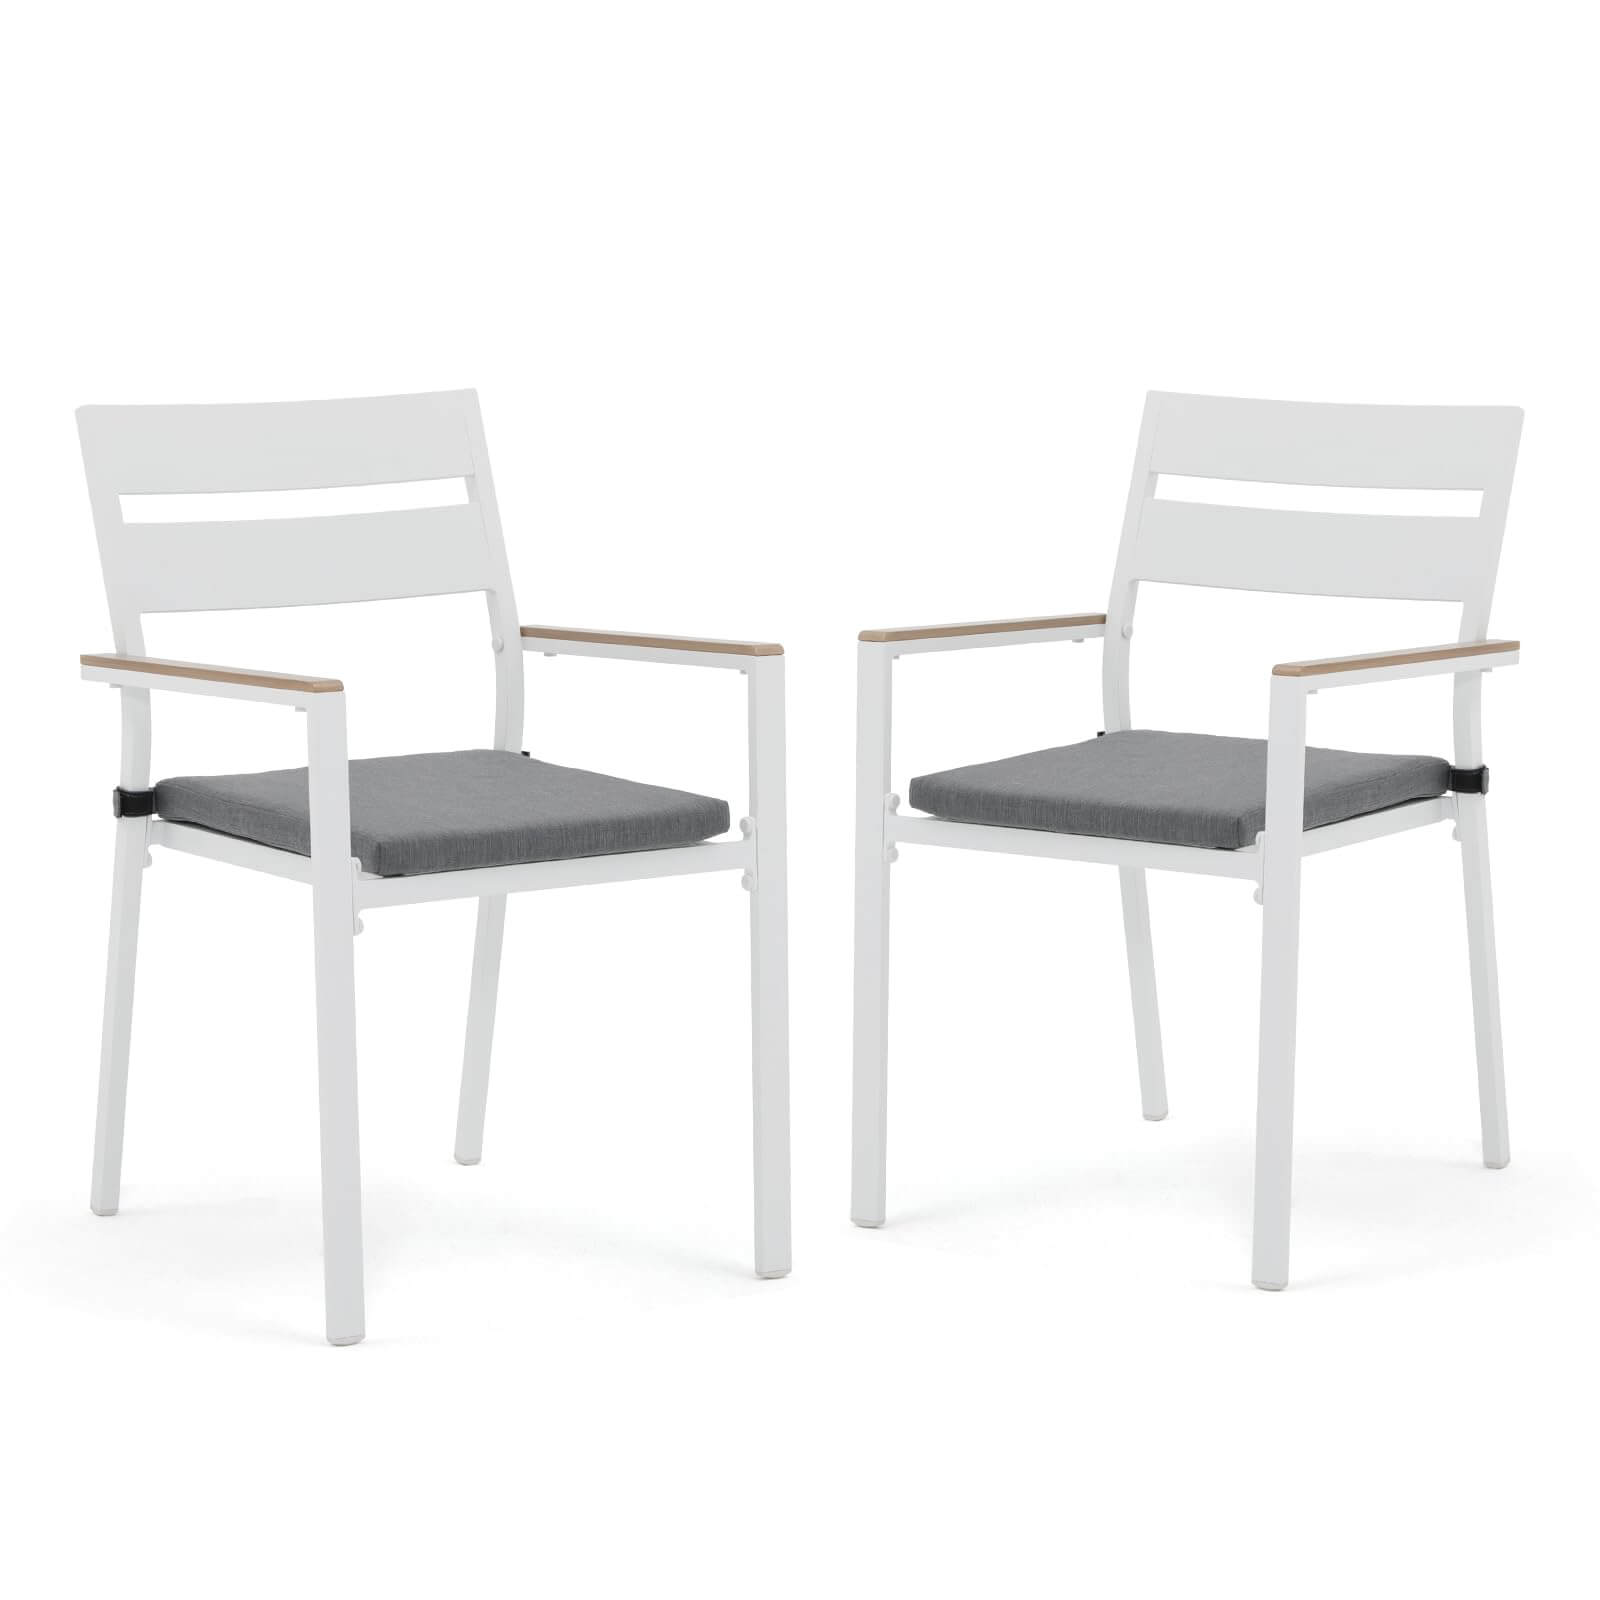 Aluminum Patio Chairs Set of 2 Outdoor Dining Chairs Stackable Bistro Chairs